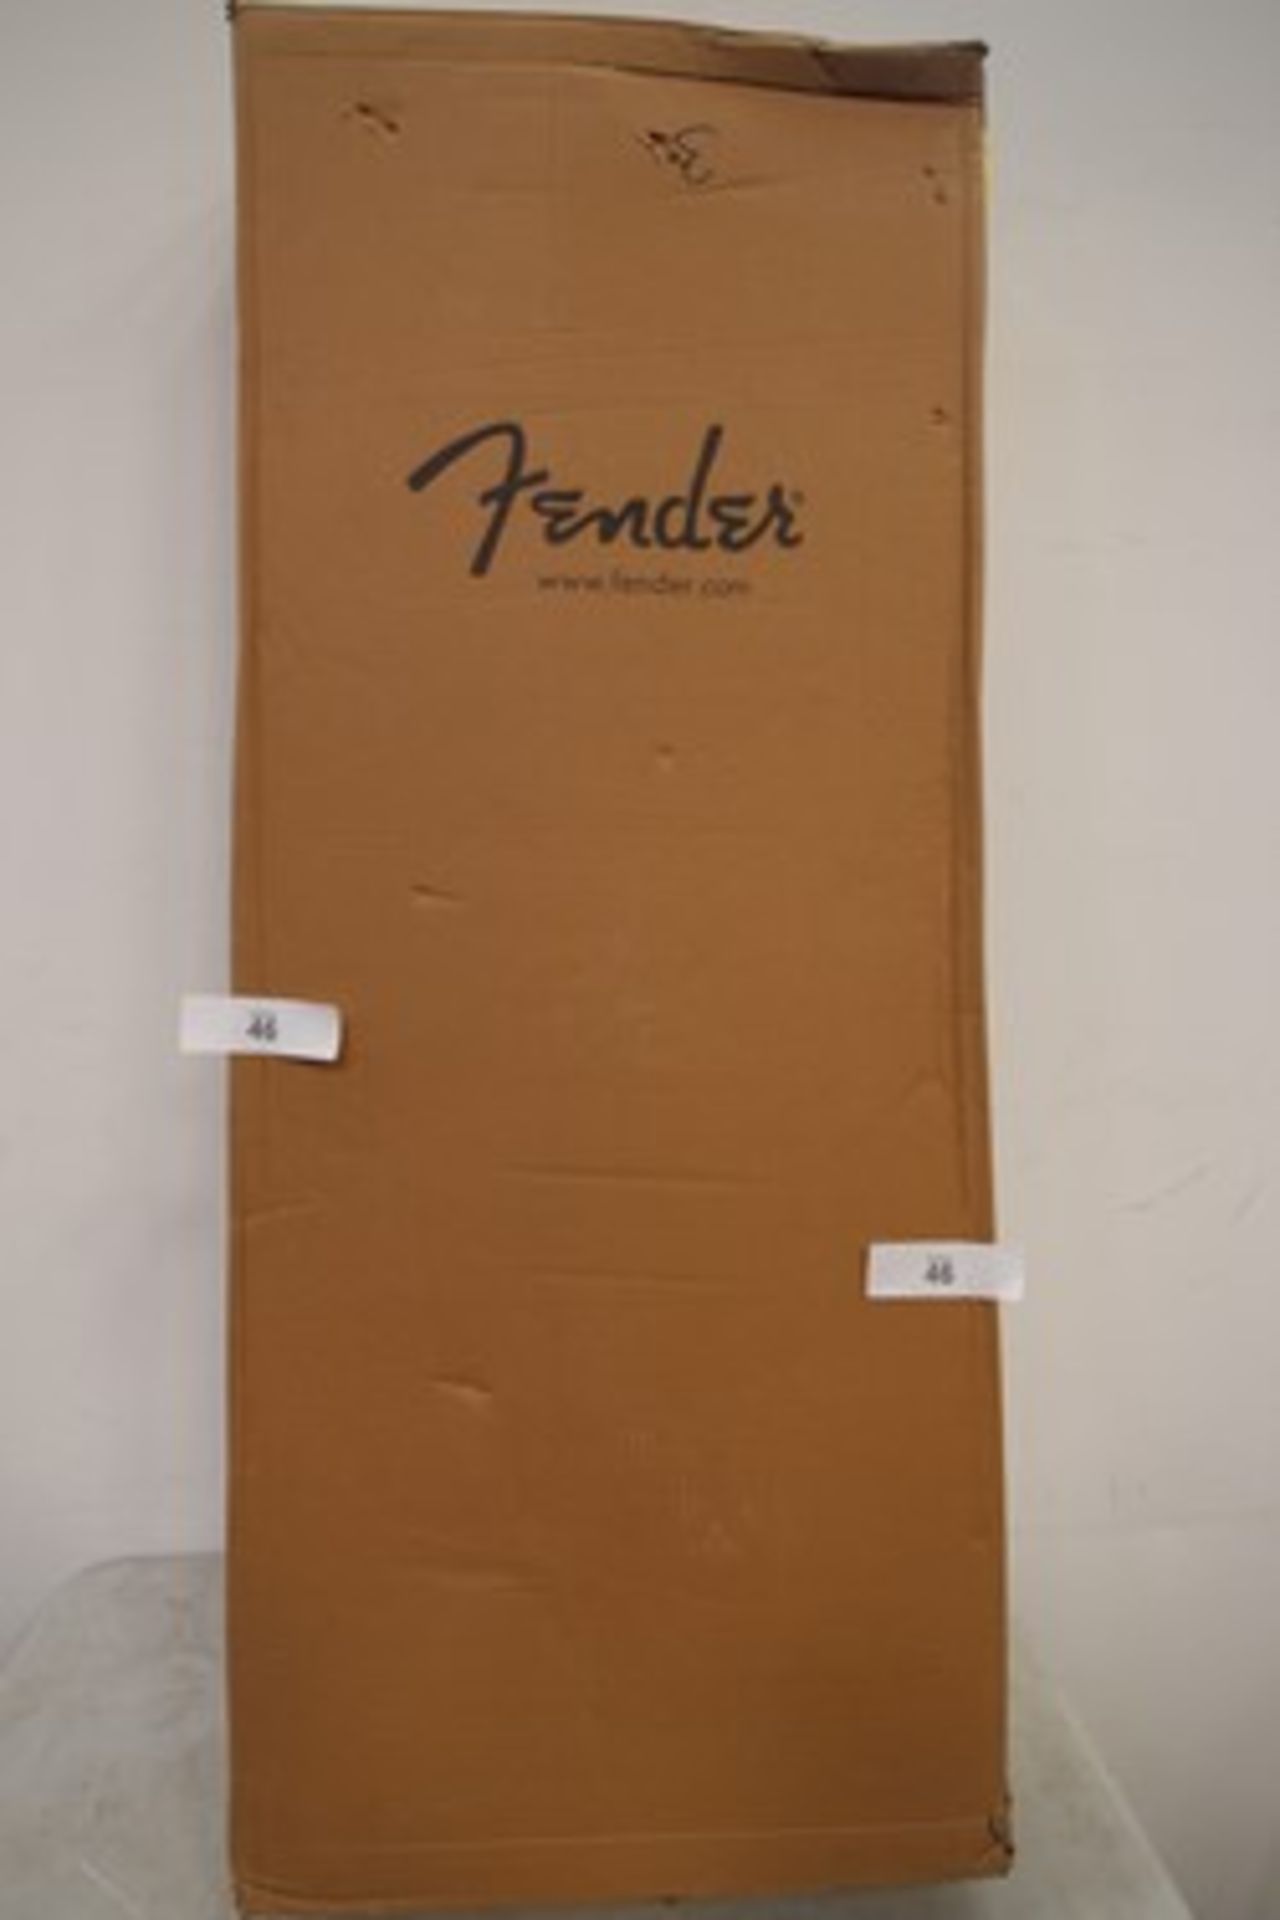 1 x Fender Paramount PO-22OE Orchestra electro acoustic guitar, in carry case - new in box (ES2) - Image 4 of 4